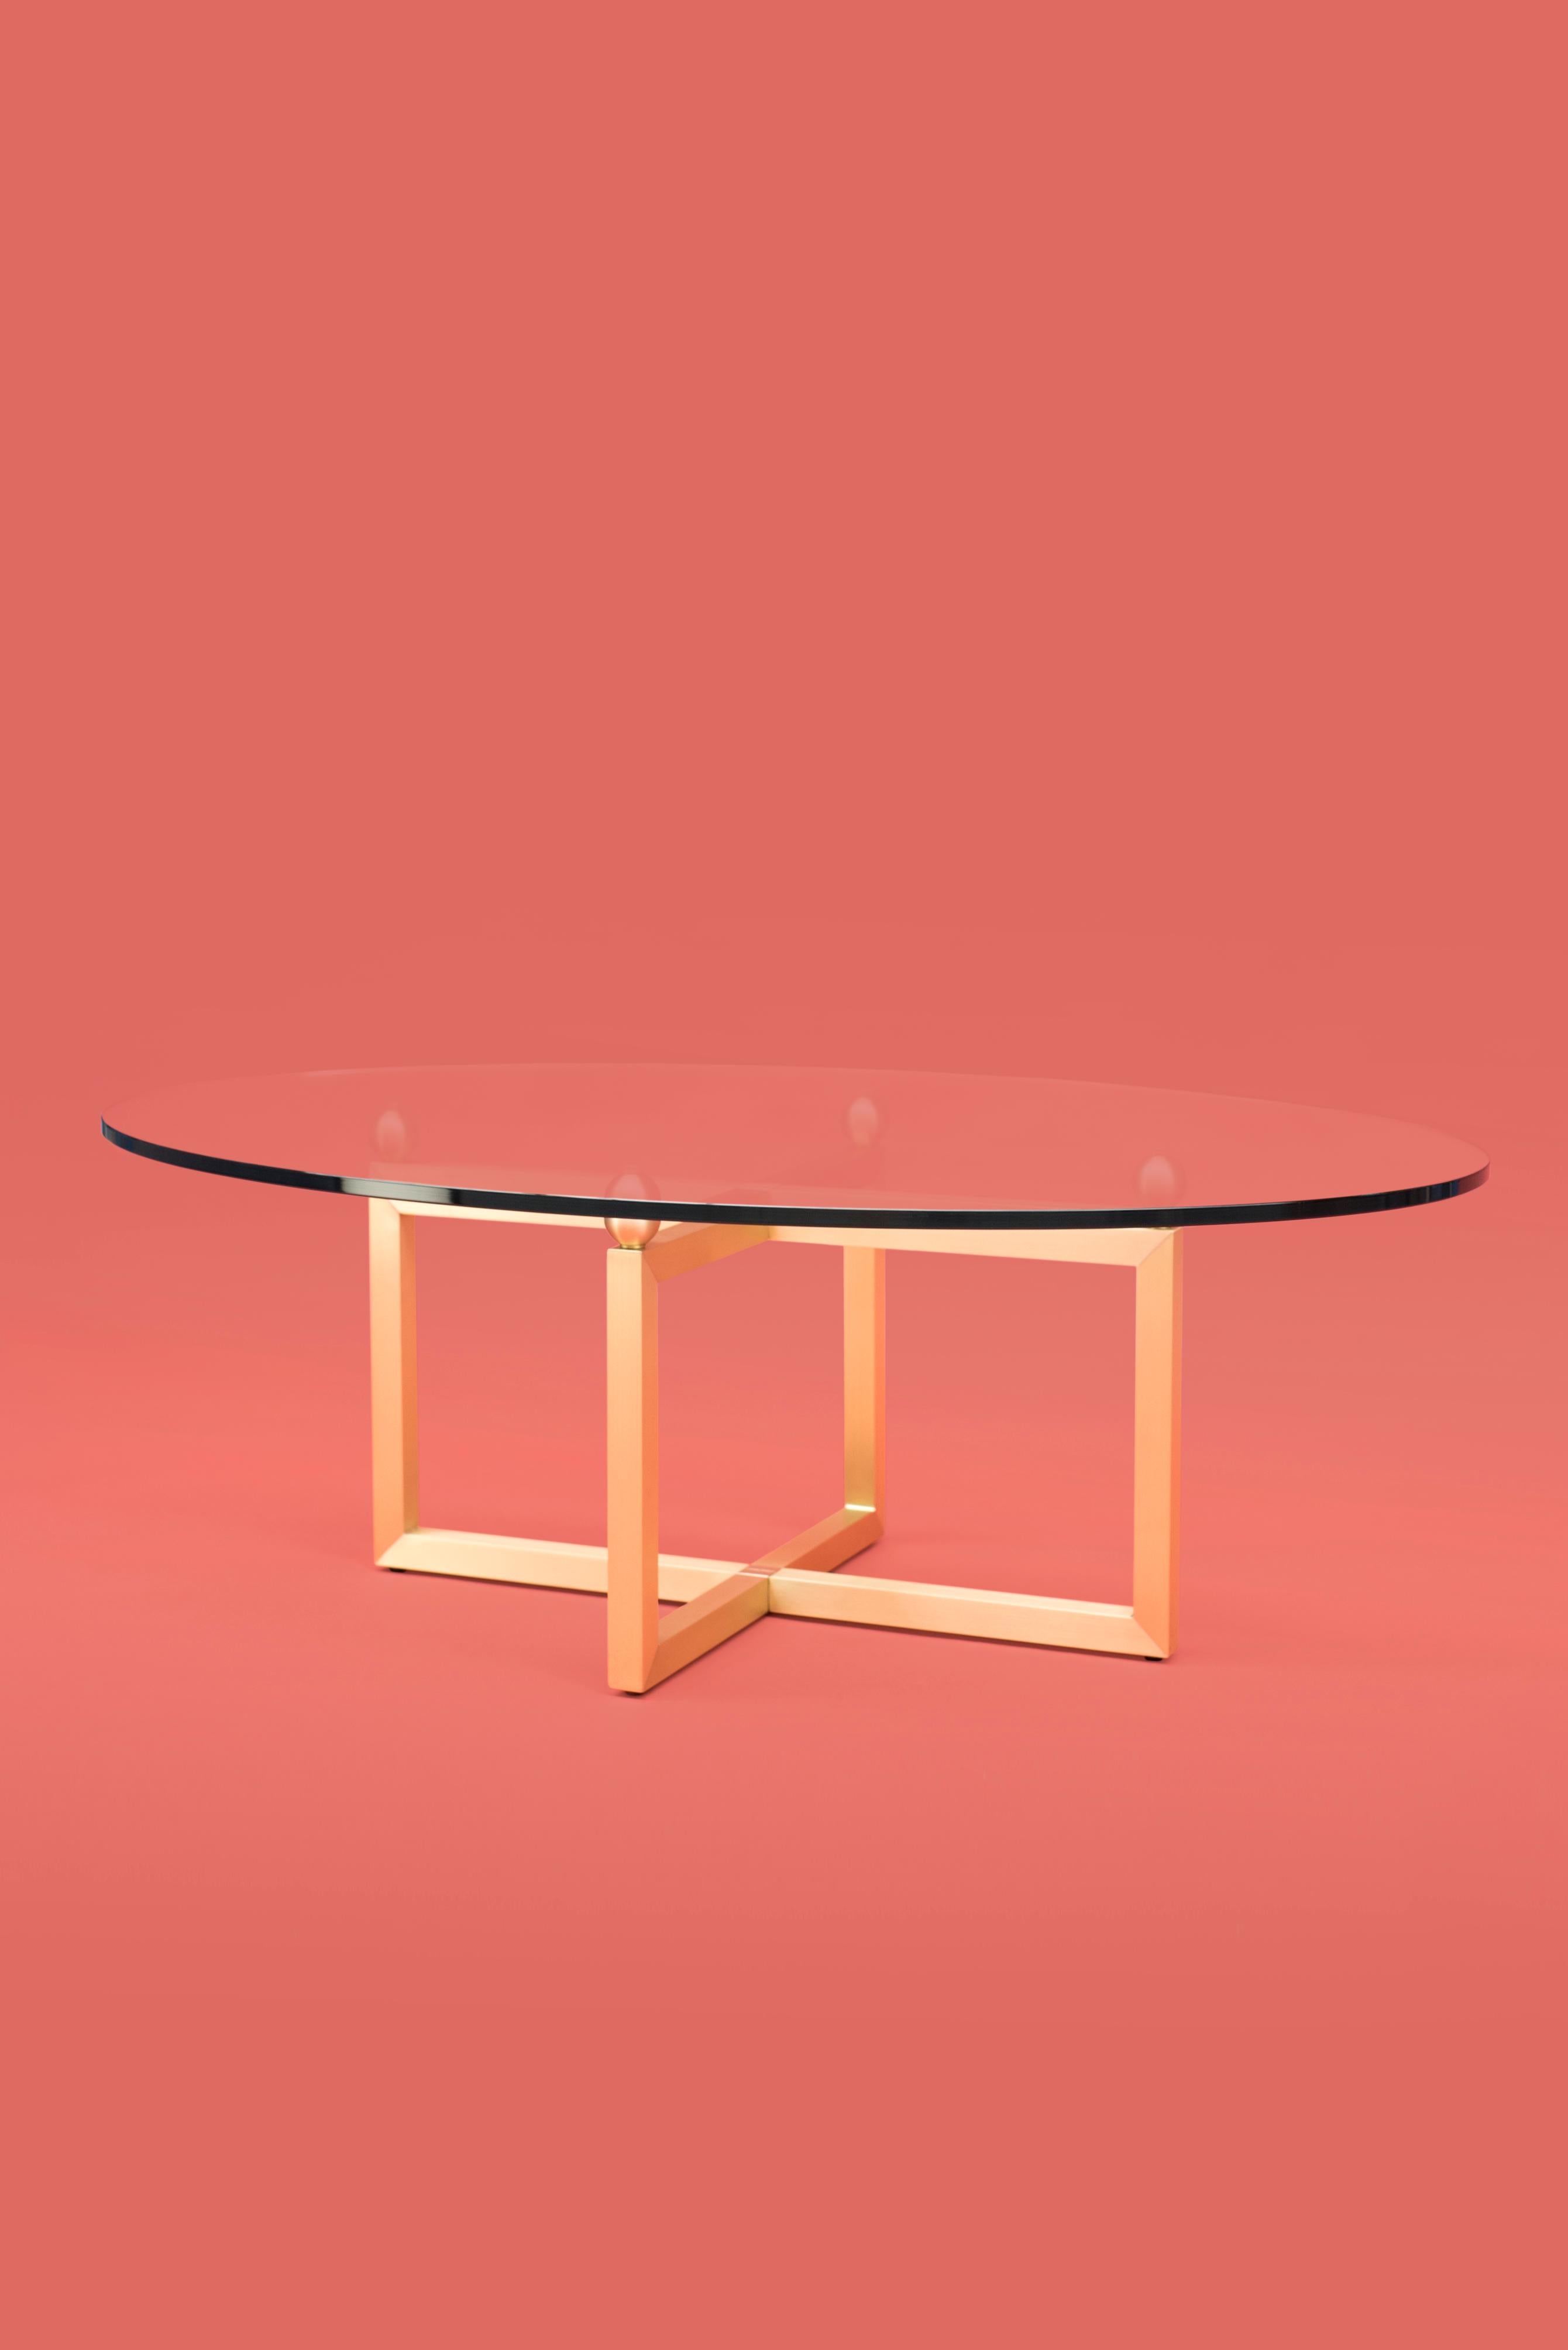 The table frame is made of 3 x 3 cm tubes and casted parts. The glass has a thickness of 15 mm and is resting on the frame. Optionally other tabletops materials can be chosen. The table is strong and can bear a lot of weight. The table can be